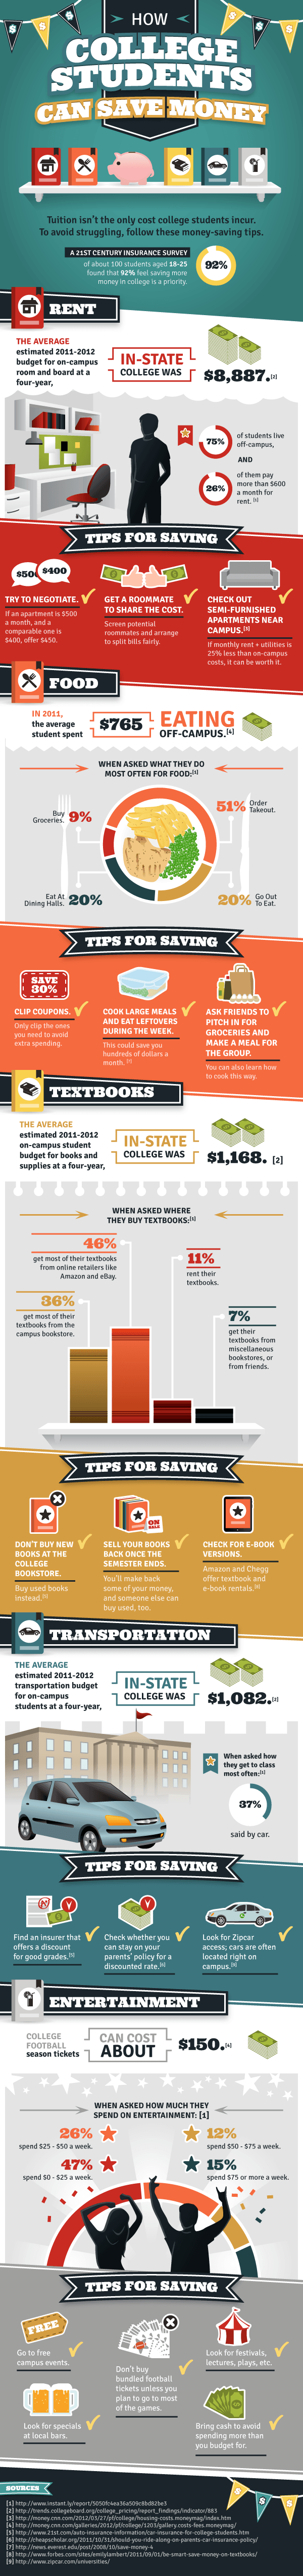 How College Students Can Save Money Infographic